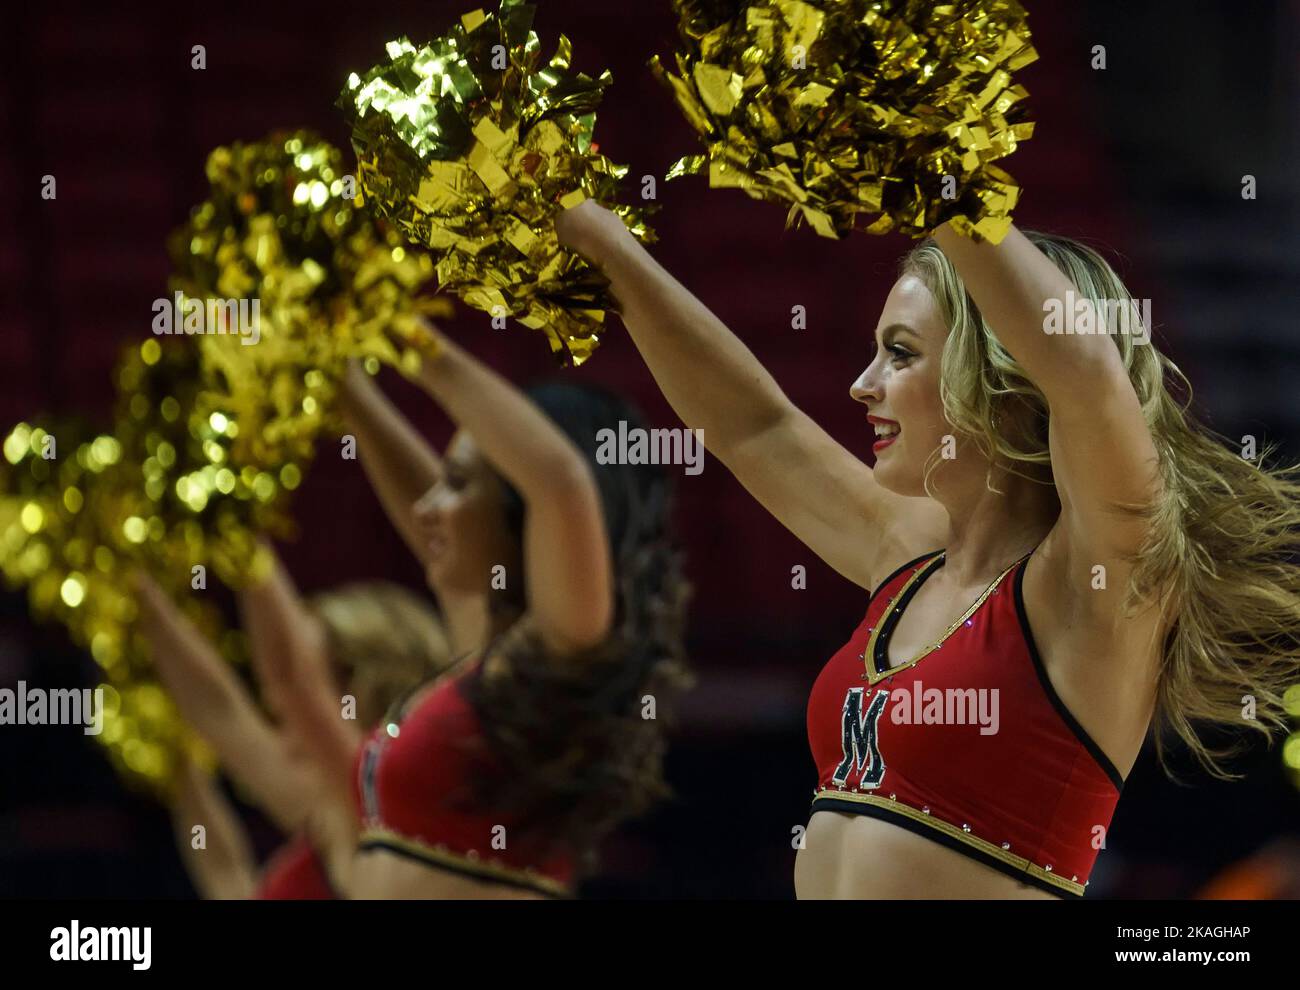 COLLEGE PARK, MD., USA - 02 NOVEMBER 2022: Maryland cheerleaders perform during a women's college basketball game between the Maryland Terrapins and the Millersville Marauders on November 02 2022, at Xfinity Center, in College Park, Maryland (Photo by Tony Quinn-Alamy Live News) Stock Photo